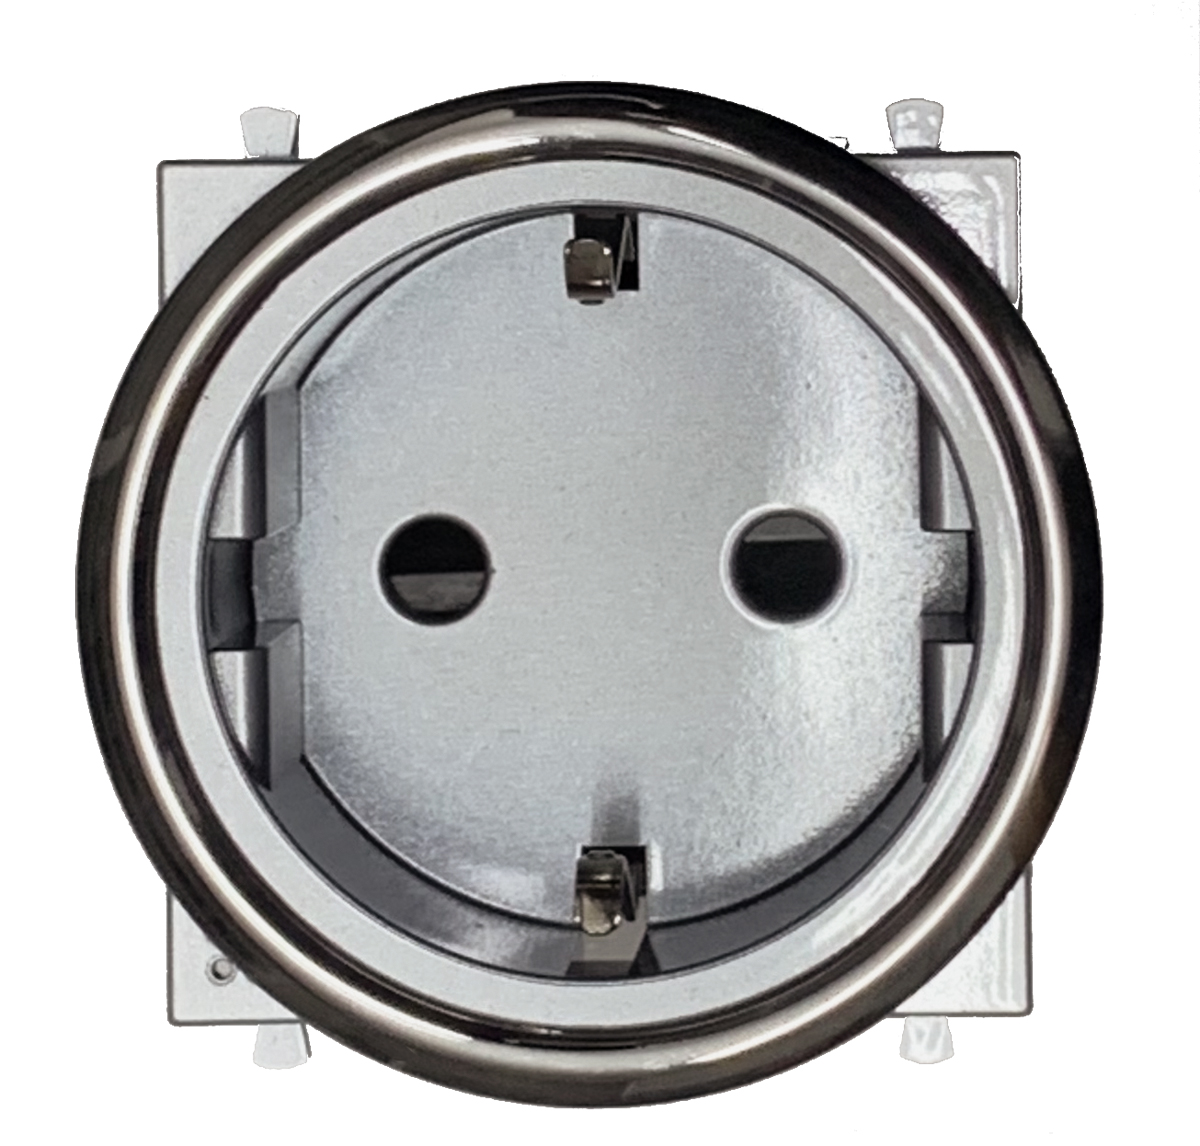 Schuko socket insert (type F). Silver-coloured with chrome-plated decorative ring